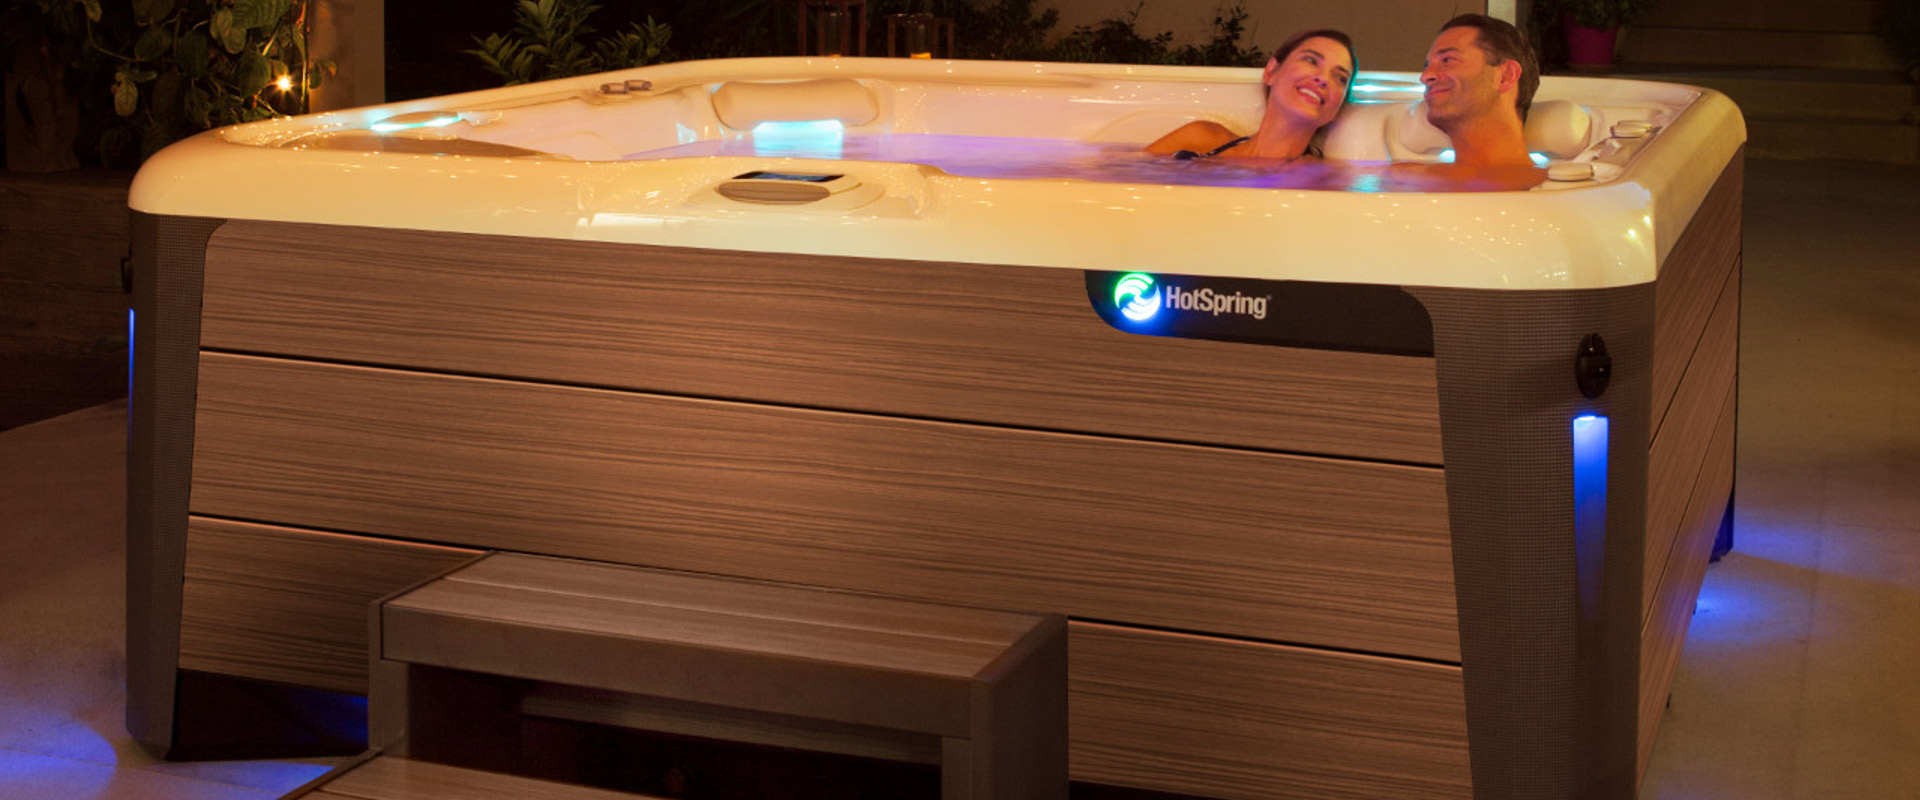 aria hot tub for sale in rockford